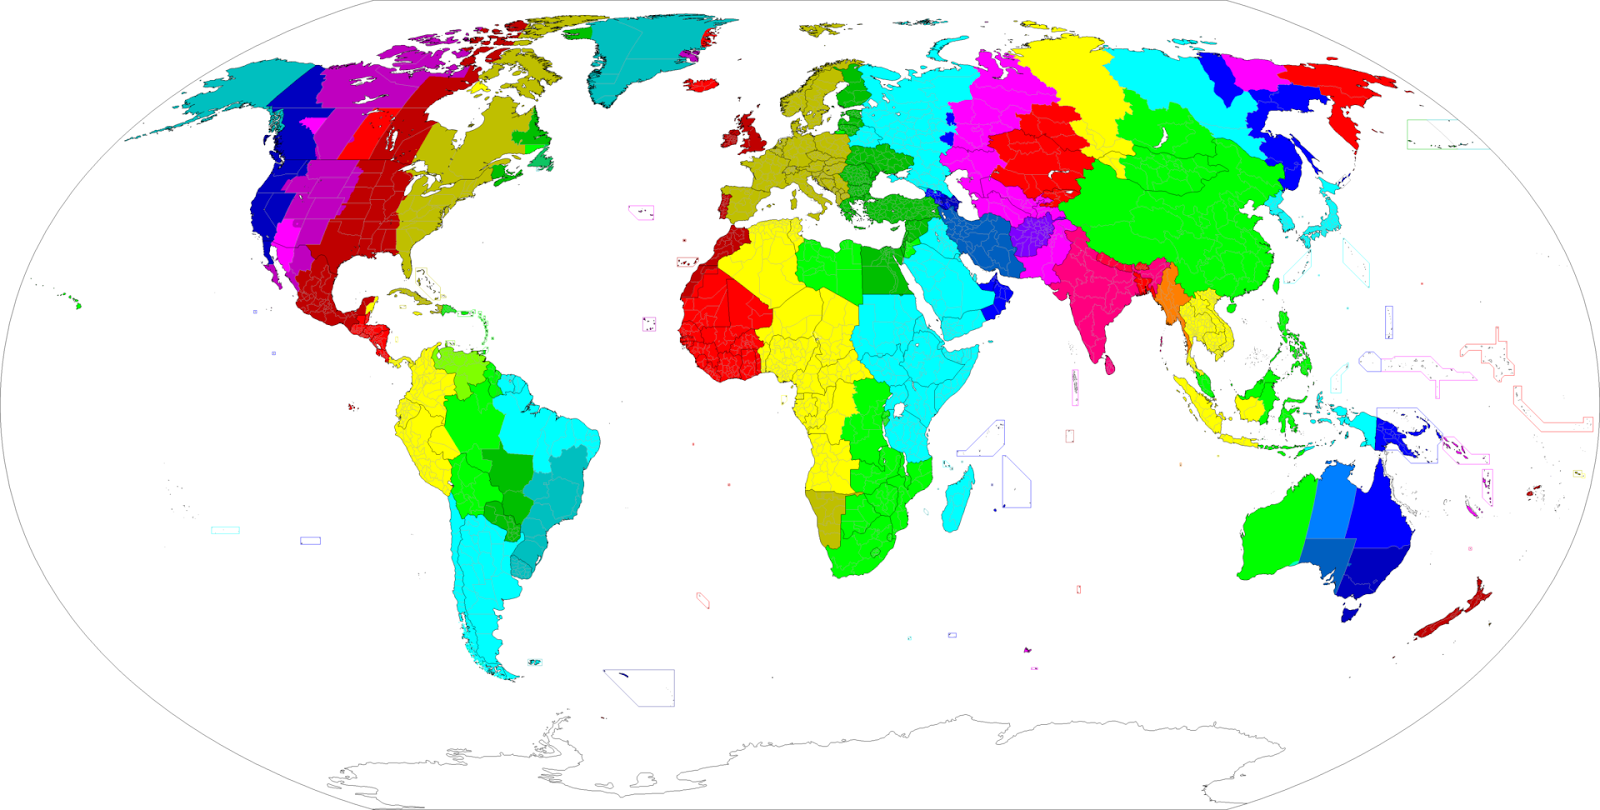 Time Zones Map